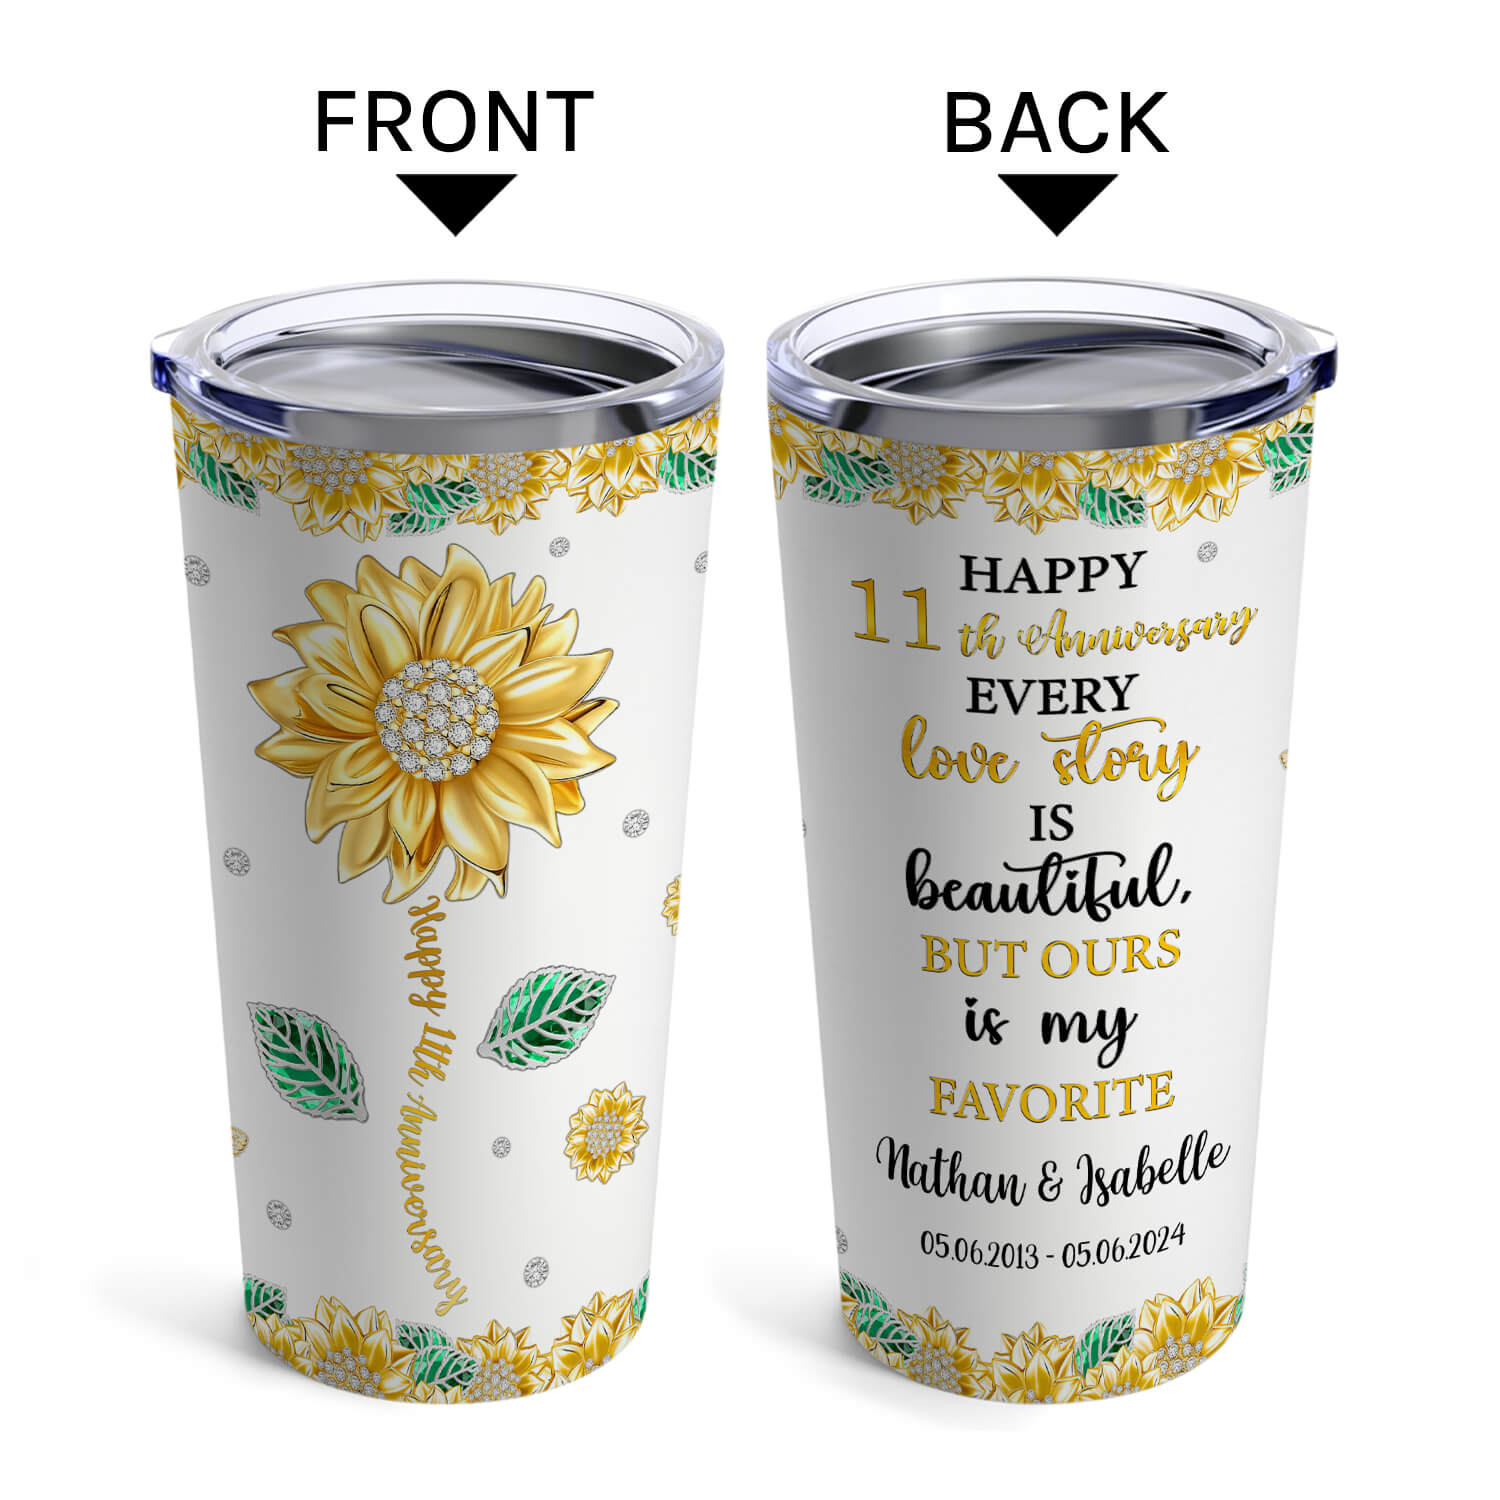 Every Love Story Is Beautiful But Our Is My Favorite - Personalized 11 Year Anniversary gift For Husband or Wife - Custom Tumbler - MyMindfulGifts